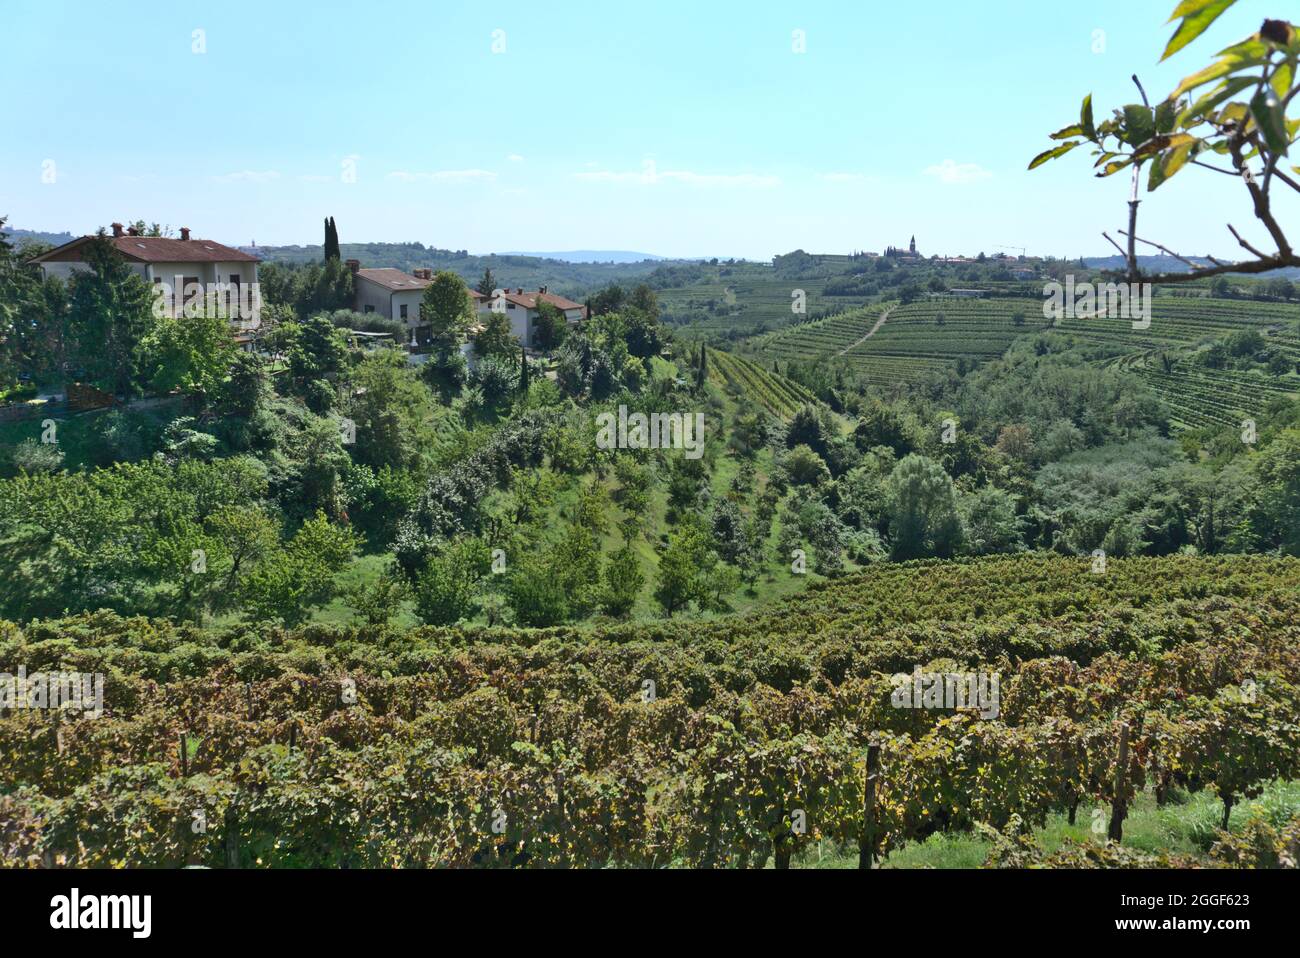 Wine yards in so called Slovenian Tuscany in the south of Slovenia with a small house on the hilltop Stock Photo